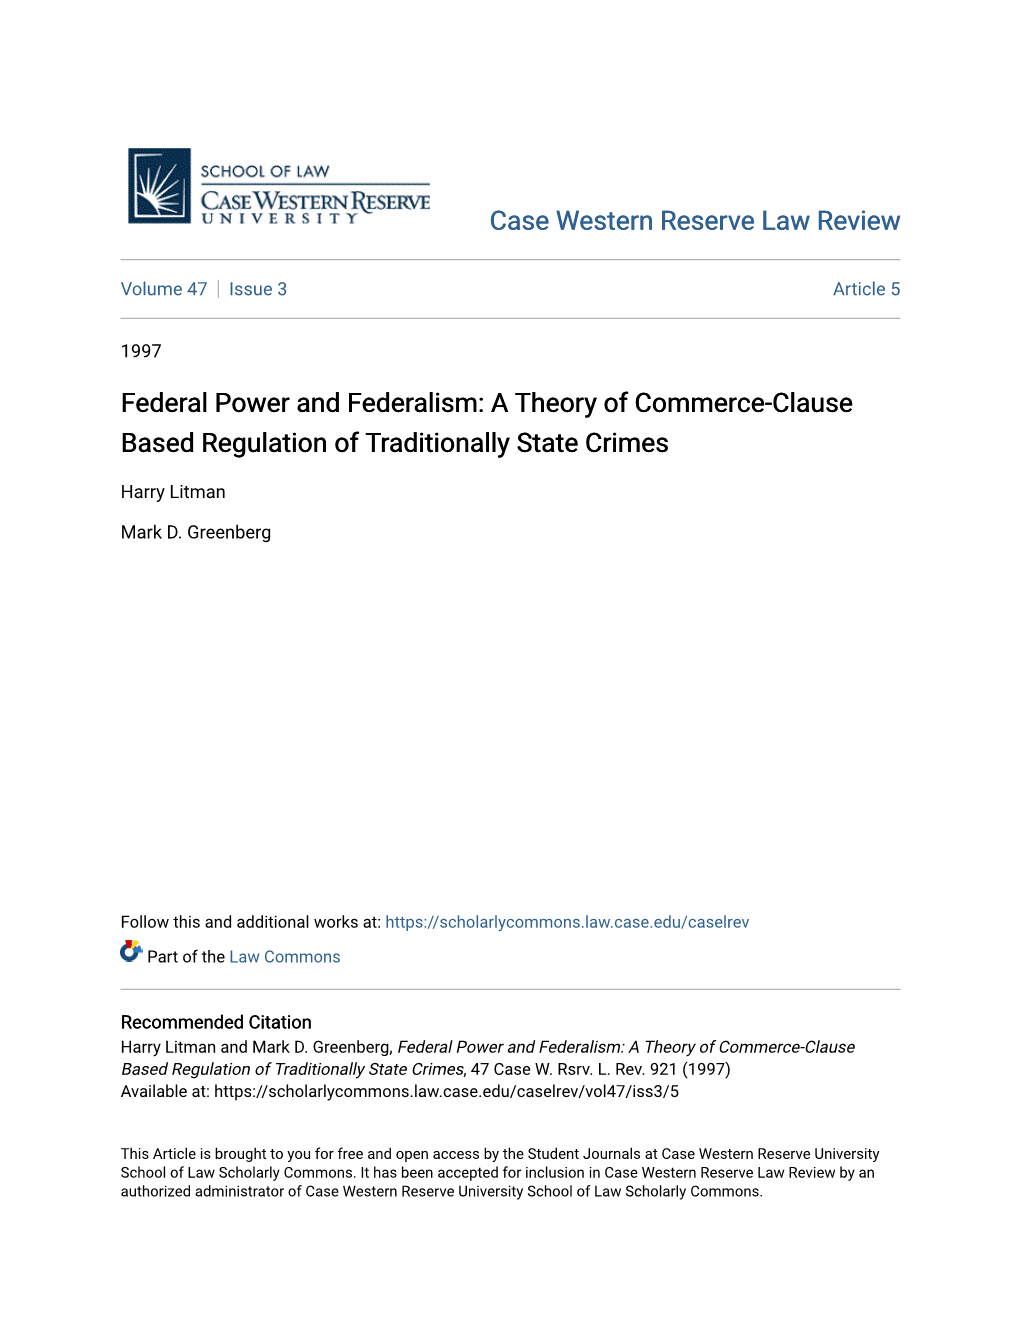 A Theory of Commerce-Clause Based Regulation of Traditionally State Crimes